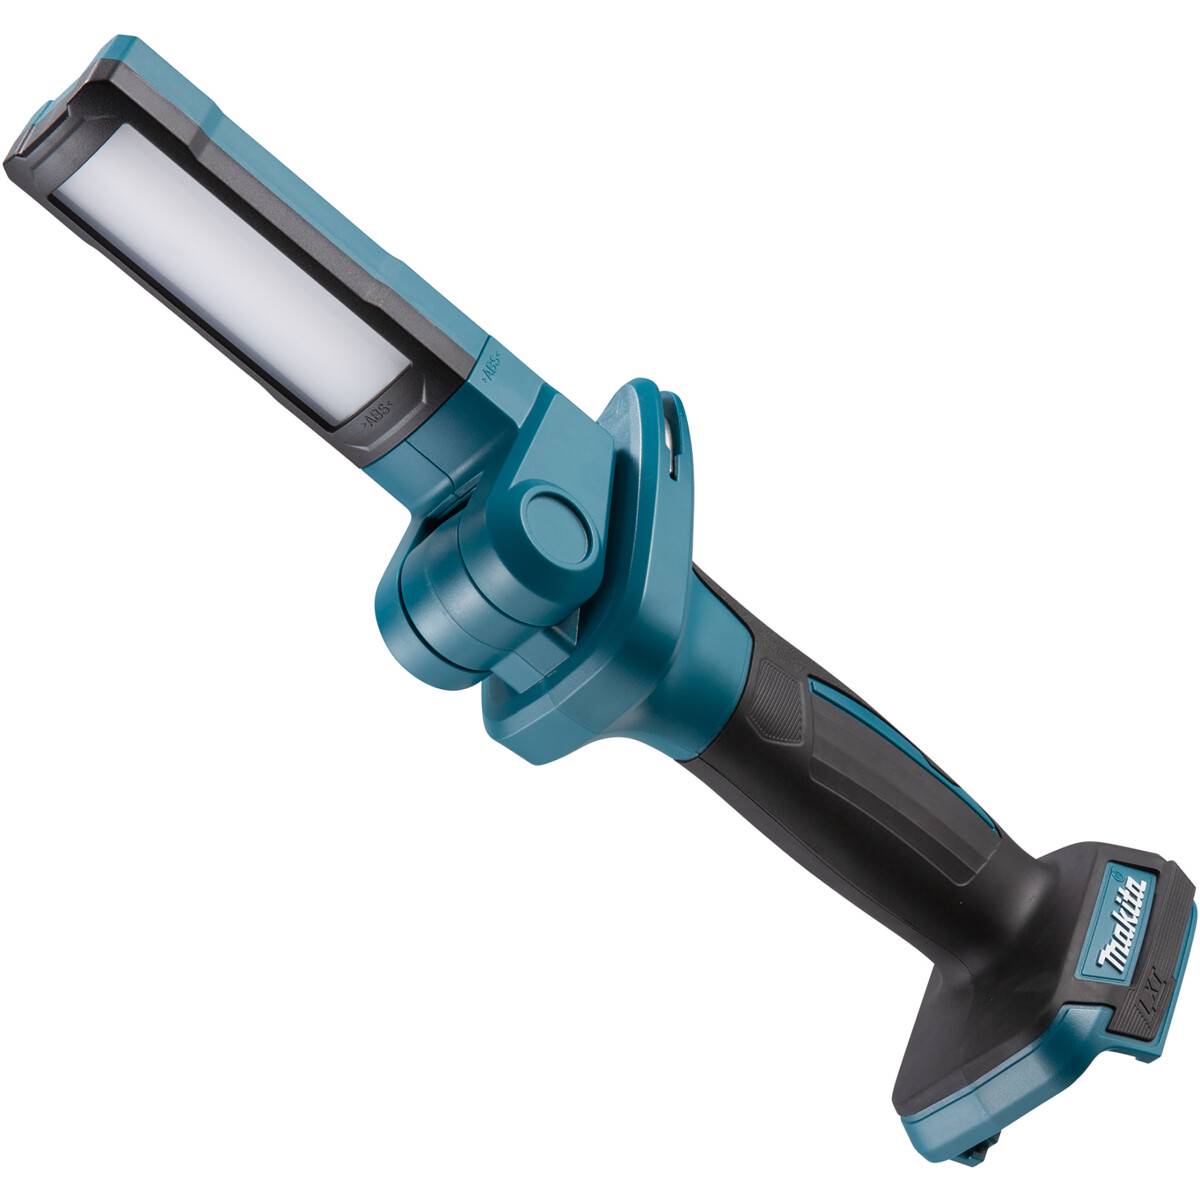 Makita DML816 Body Only 18V LXT LED Flashlight from Lawson HIS